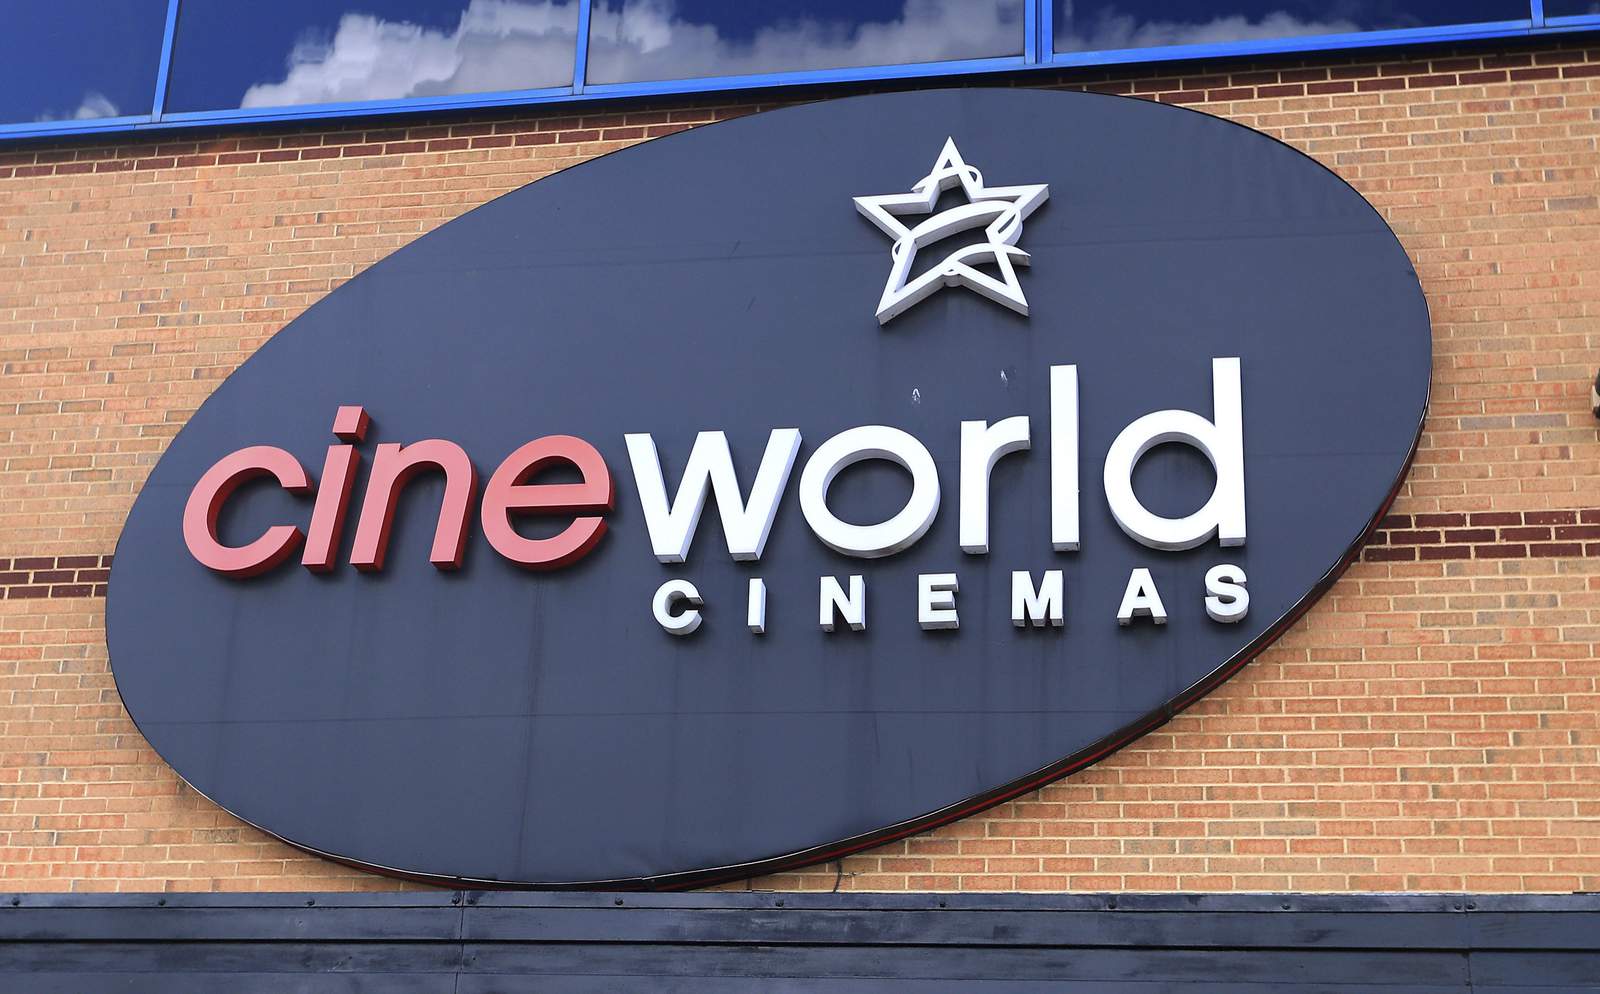 Cineworld may close US and UK theaters after Bond film delay